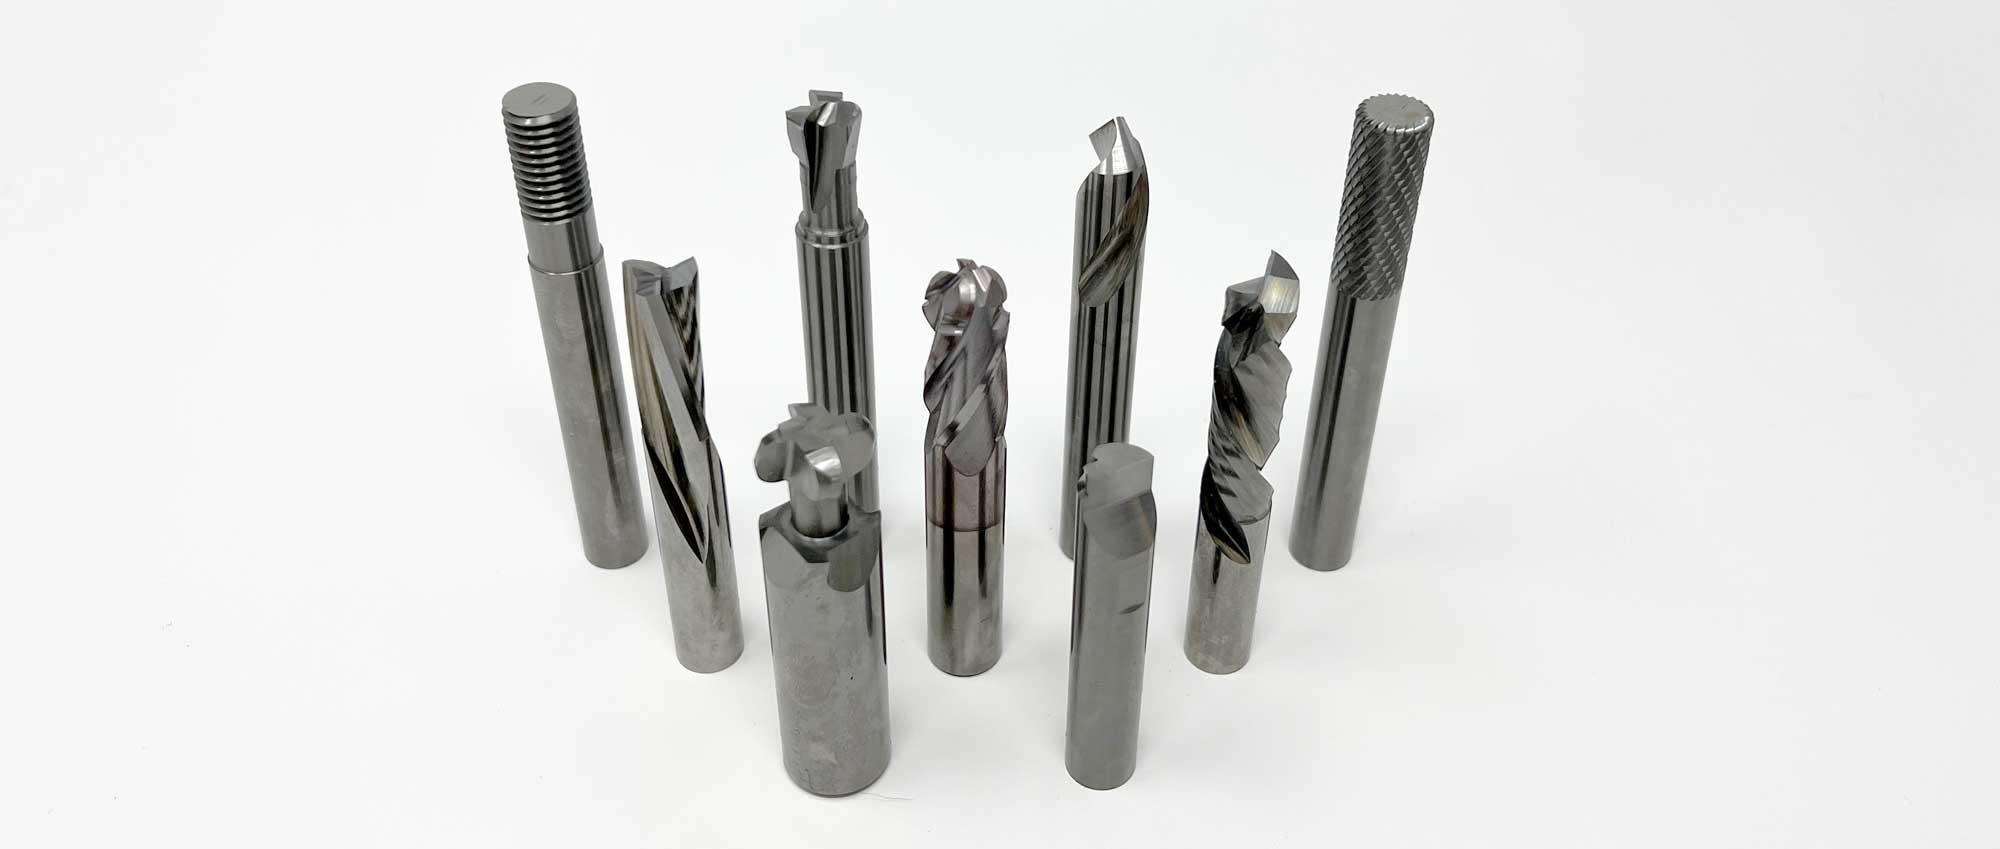 Sample of manufactured tooling.